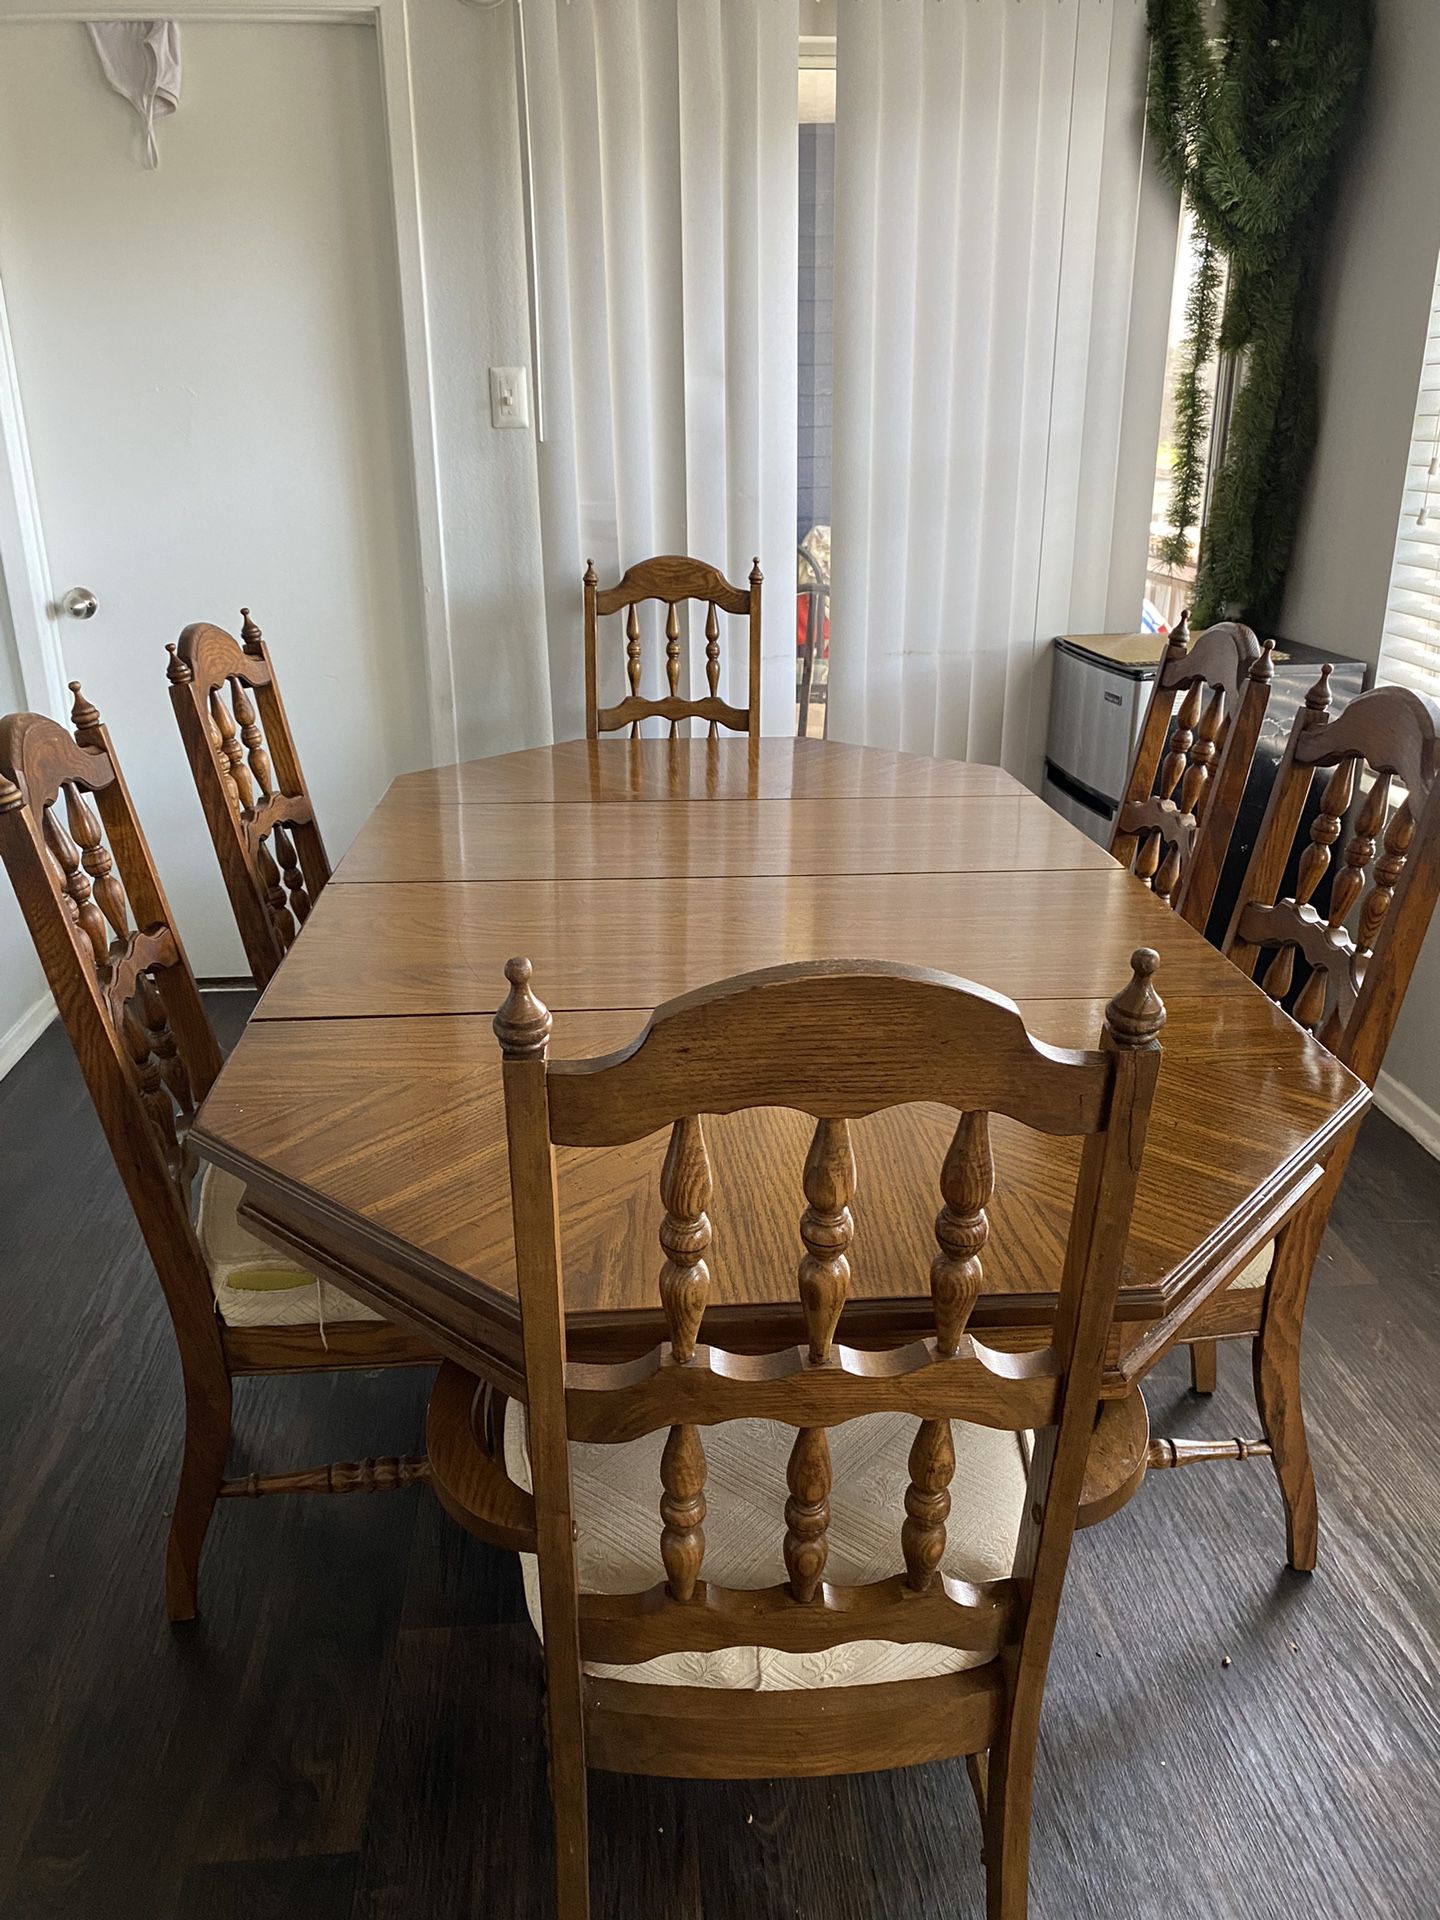 Living Room Table With 6 Chairs And Outside Table With 4 Chairs